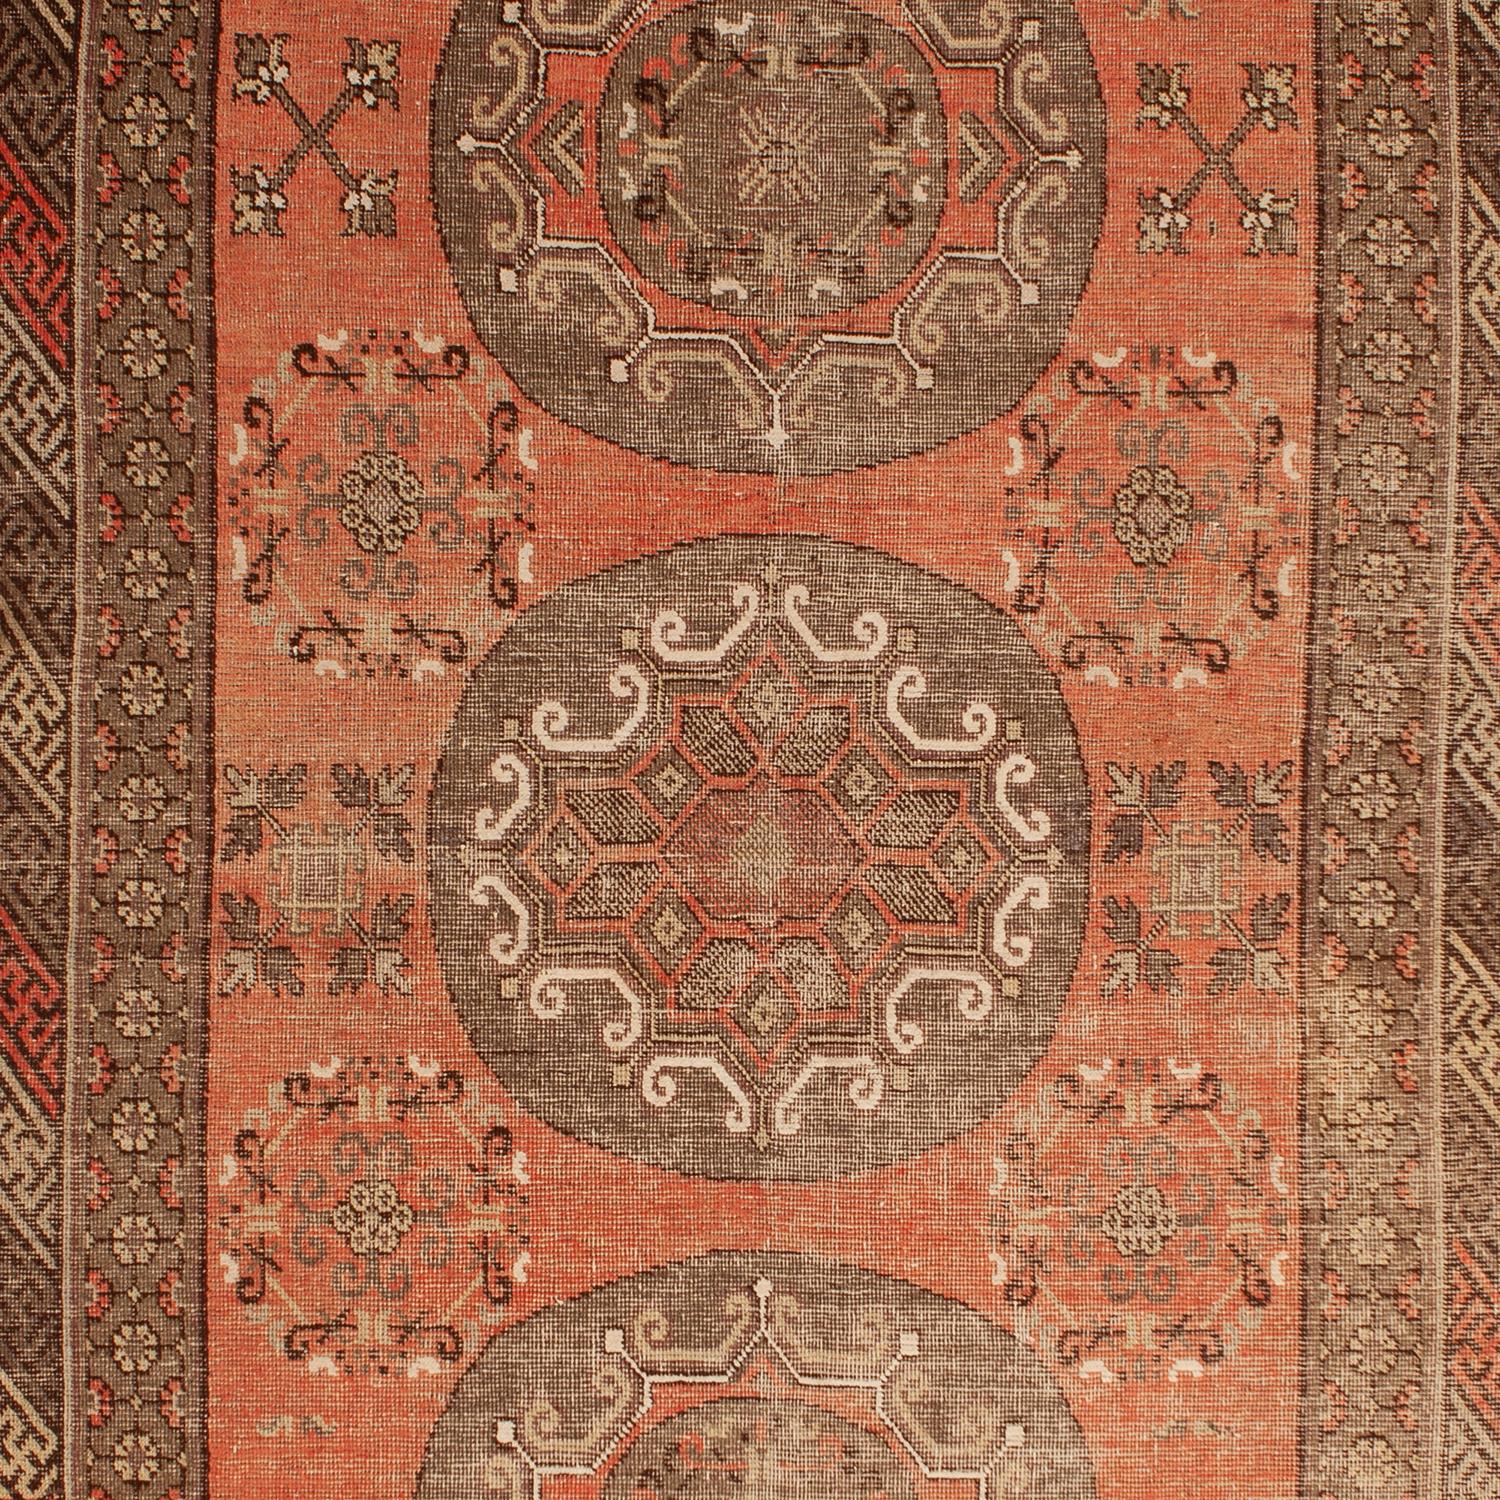 Elevate your home decor with this exquisite Orange Vintage Traditional Kohtan Wool Rug - 5'3